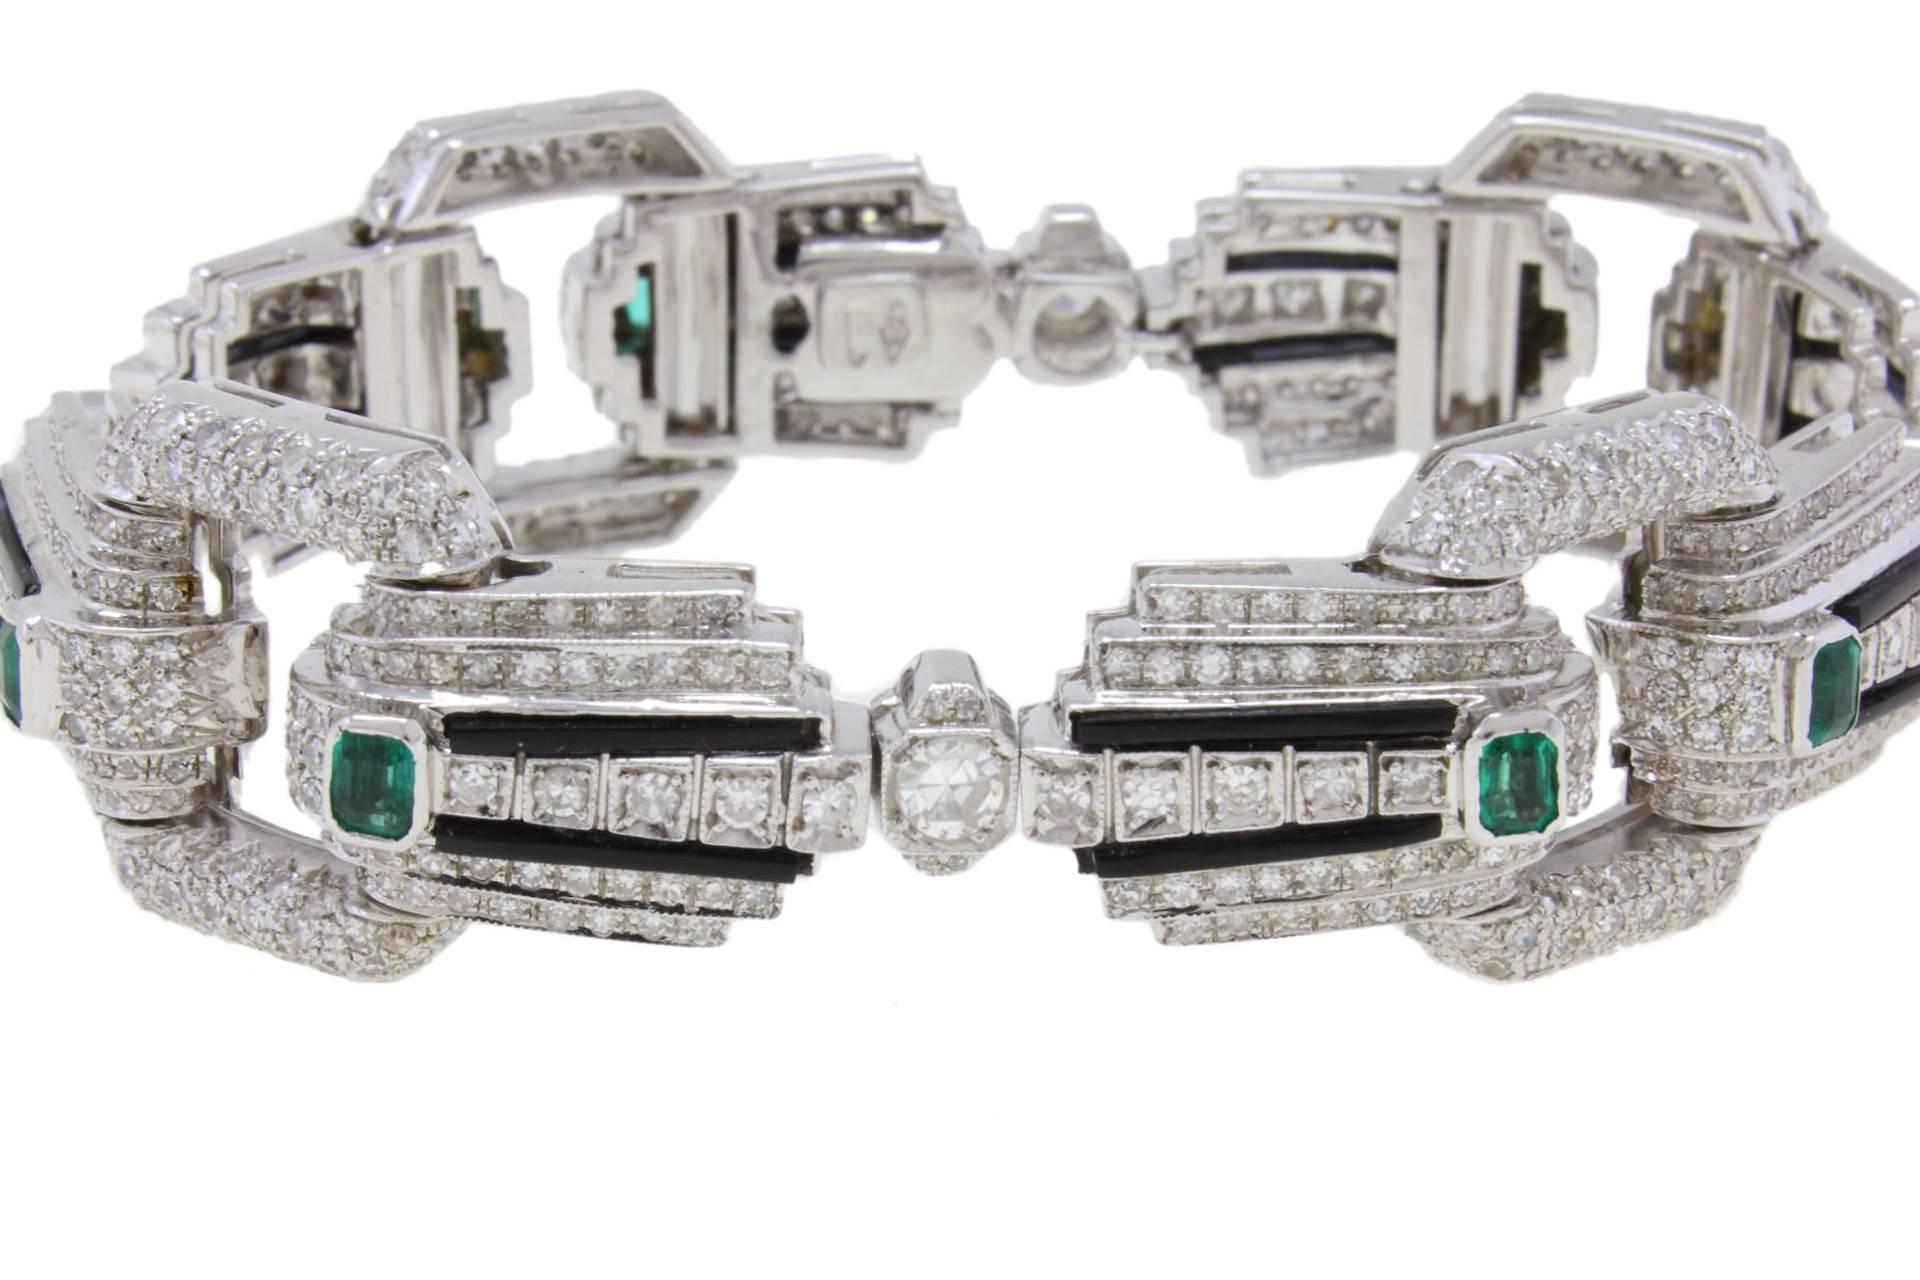 Charming and splendid link bracelet in 14Kt white gold adorned and linked with diamonds, shining emeralds, and onyx.
diamonds(7.49Kt)
emeralds(1.34Kt)
onyx(0.60gr) 
Tot weight 53.9 gr
R.f. 8223056